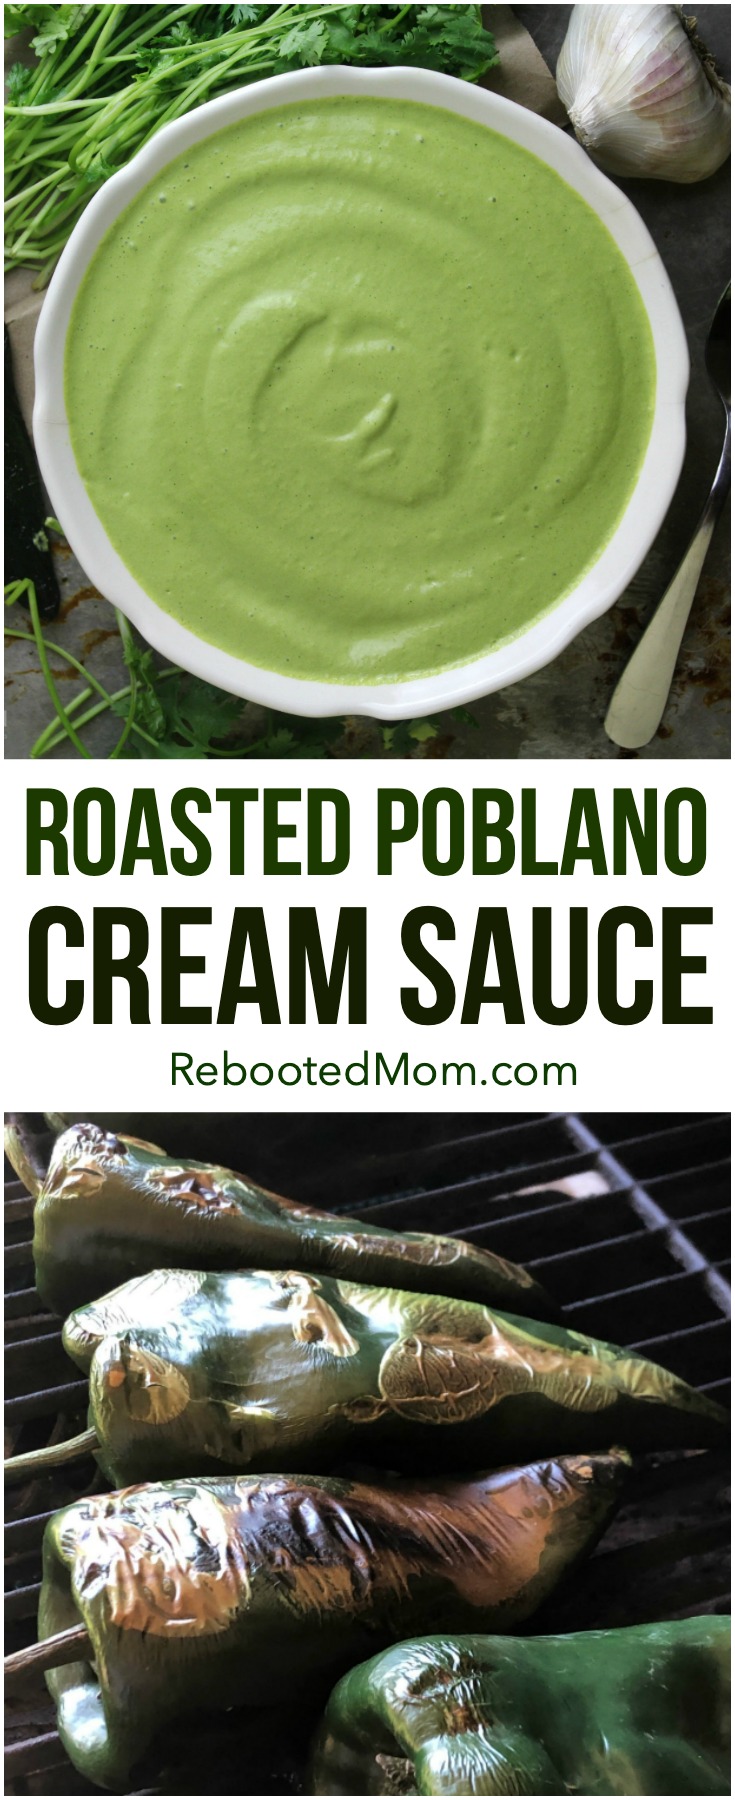 An easy recipe for the best Roasted Poblano Cream Sauce, made with simple ingredients for a rich and delicious sauce that's full of deep flavor!  #poblano #sauce #dip #cream #roasted